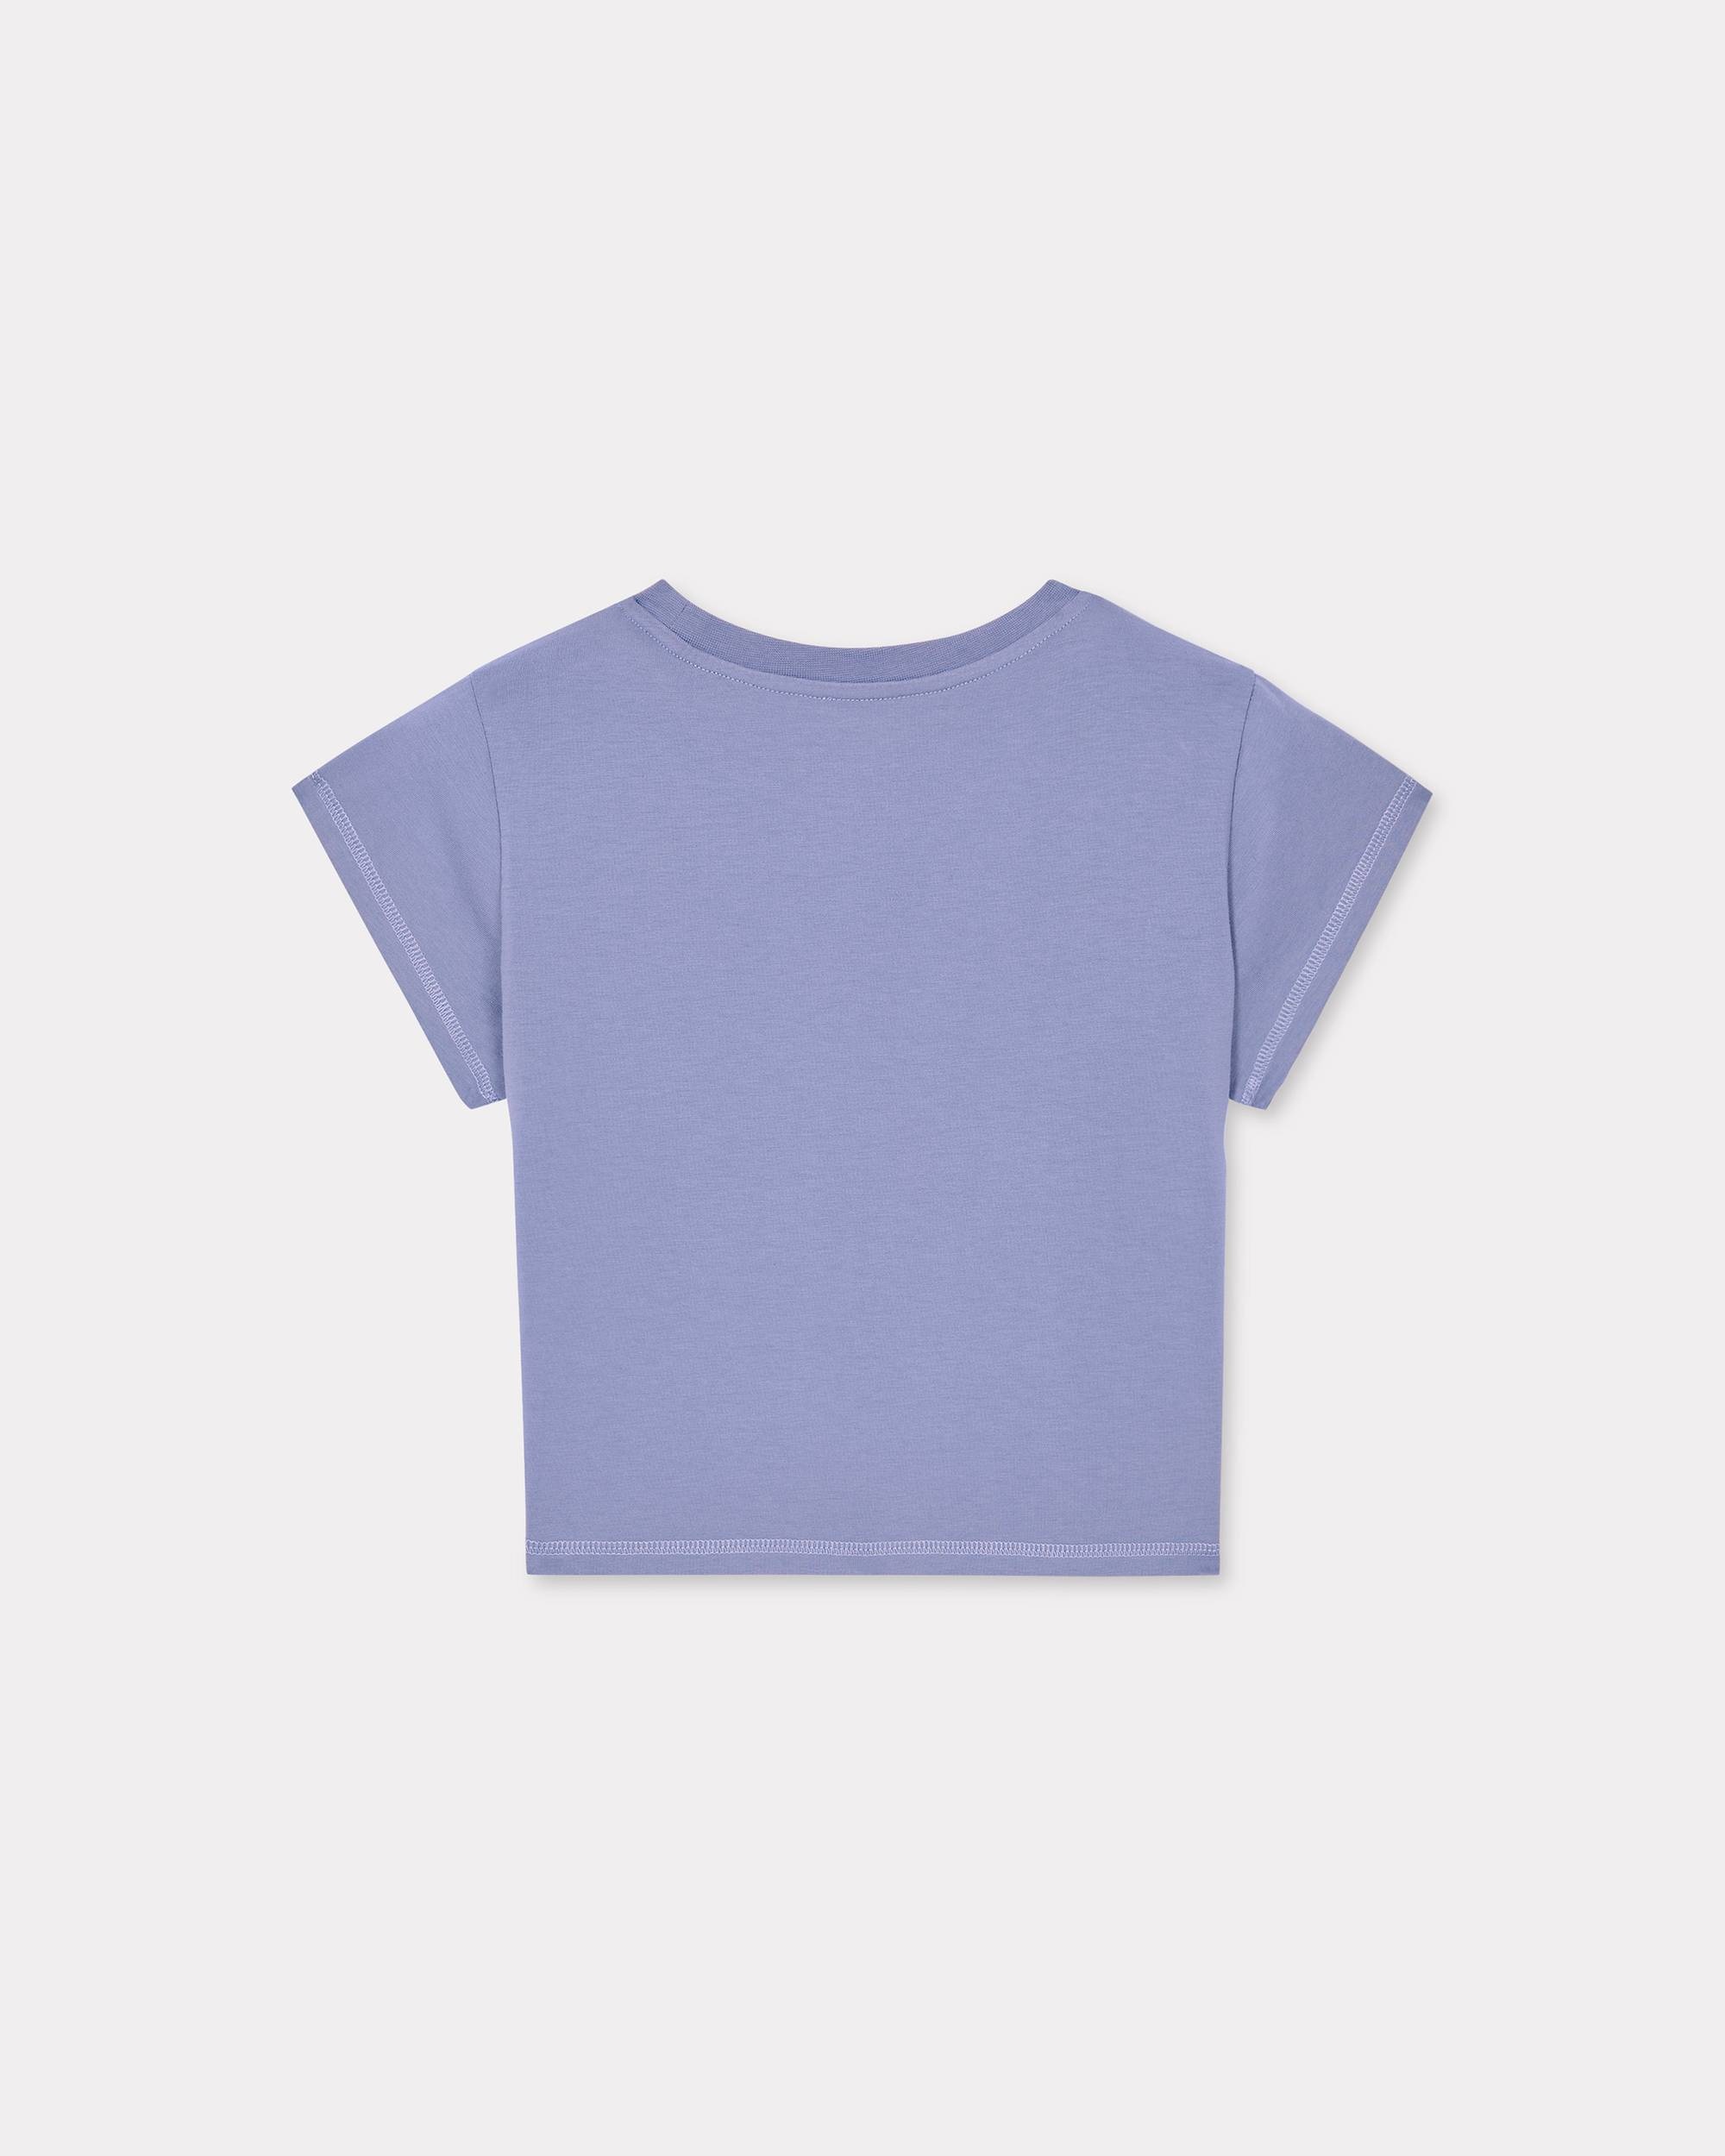 'KENZO Rose' baby fit T-shirt - 2